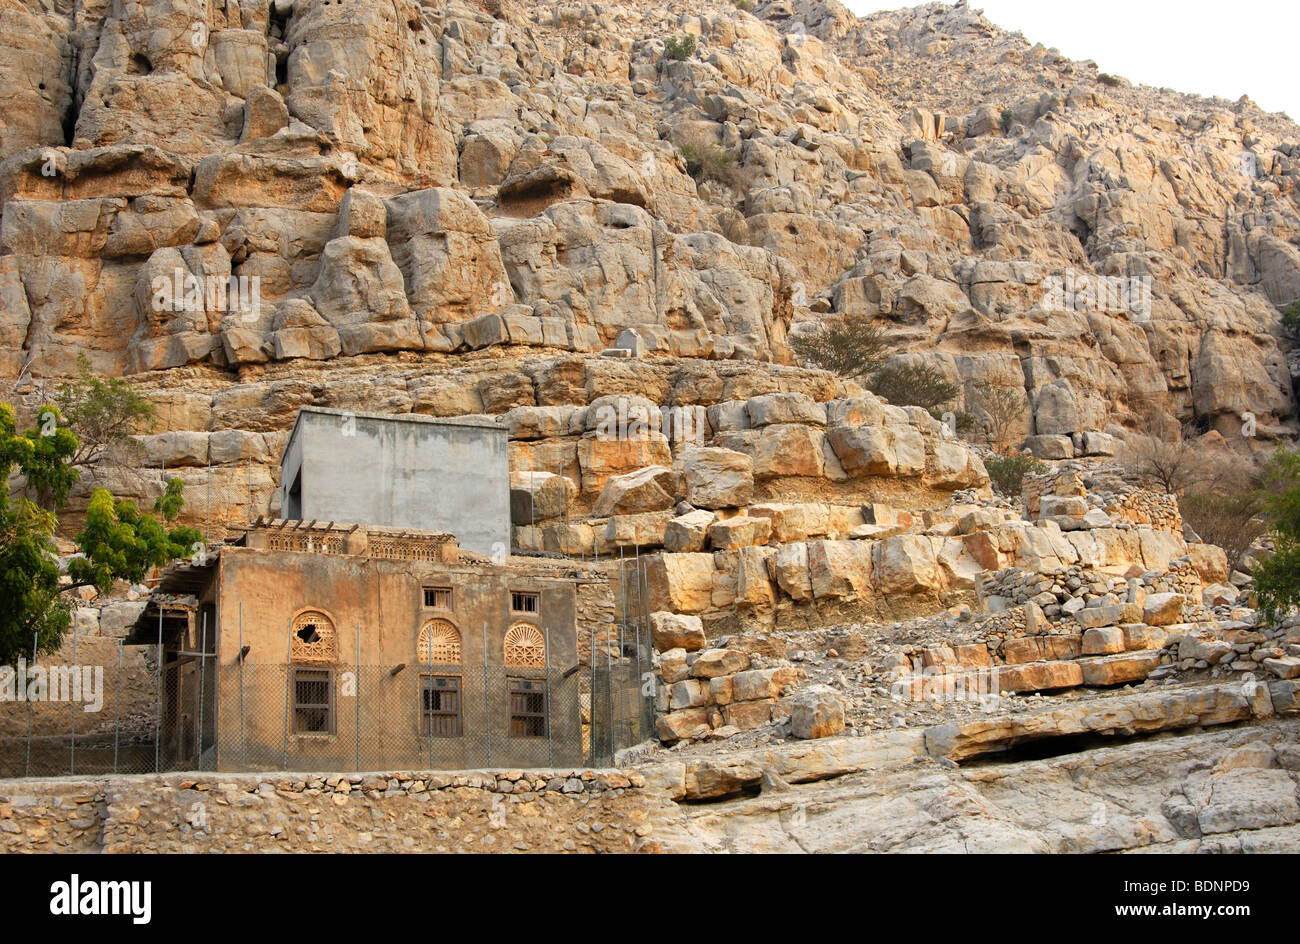 Traditional stone houses in the village of Tawi, Wadi Qadah, Musandam, Sultanate of Oman, Middle East Stock Photo